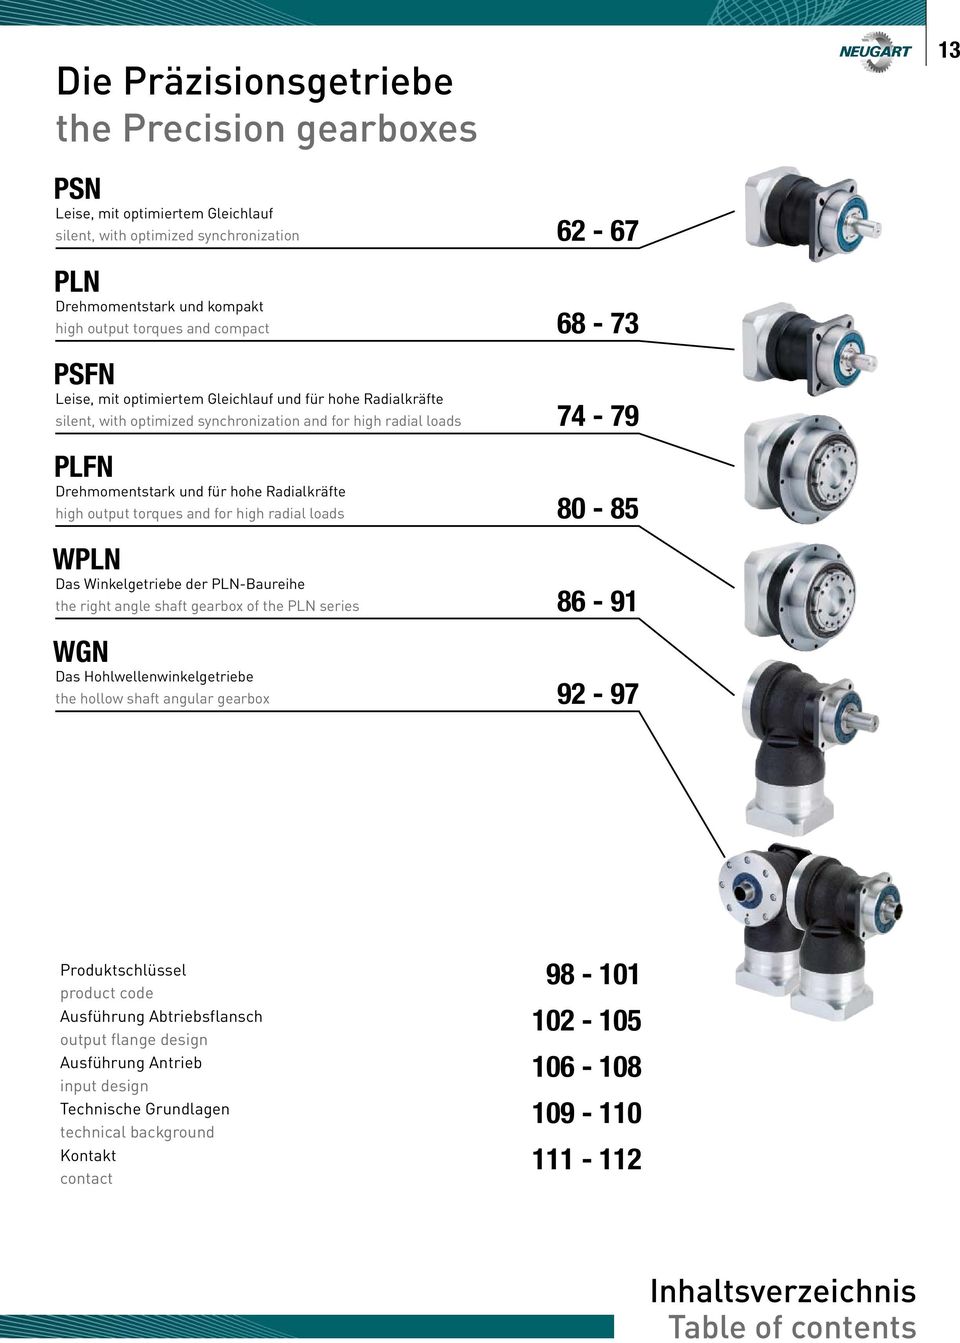 torques and for high radial loads 80 85 WPLN Das Winkelgetriebe der PLNBaureihe the right angle shaft gearbox of the PLN series 86 9 WGN Das Hohlwellenwinkelgetriebe the hollow shaft angular gearbox